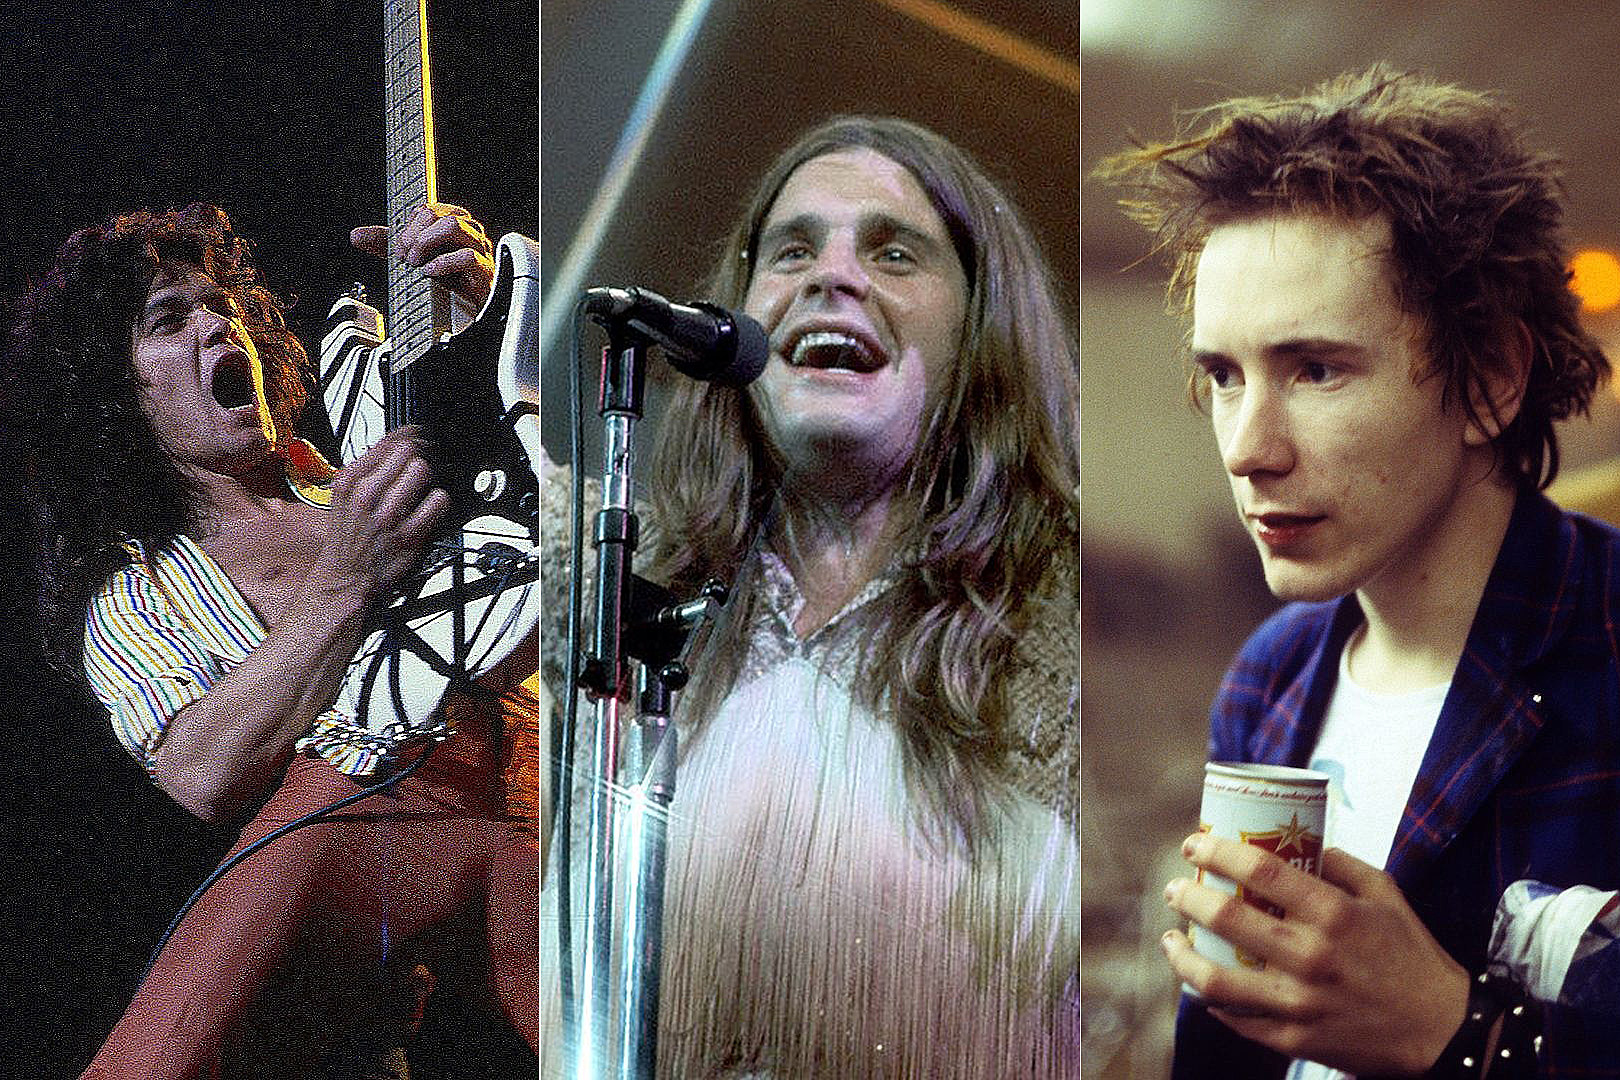 The Best New Rock / Metal Band From Each Year of the 1970s pic